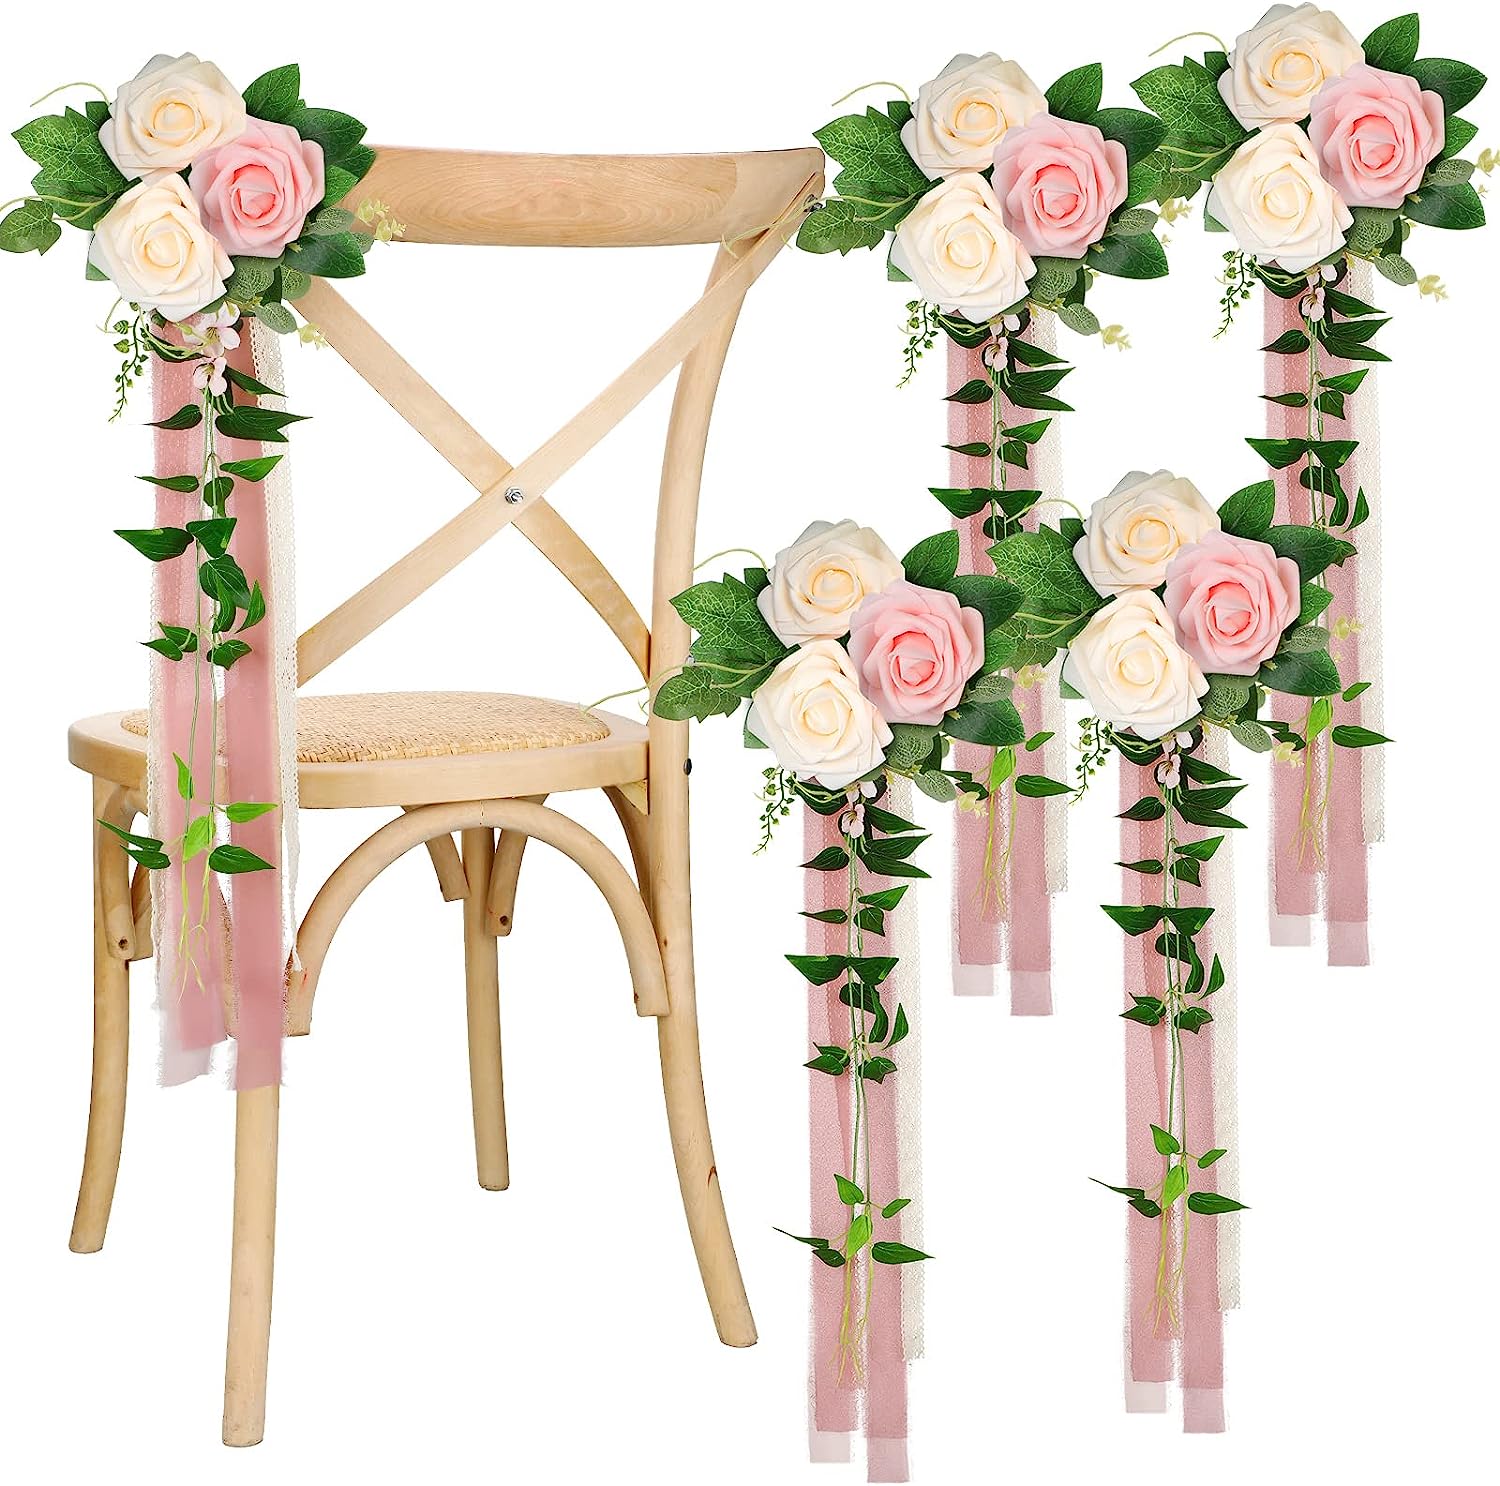 Pew Bows For Church Wedding WholeSale - Price List, Bulk Buy at